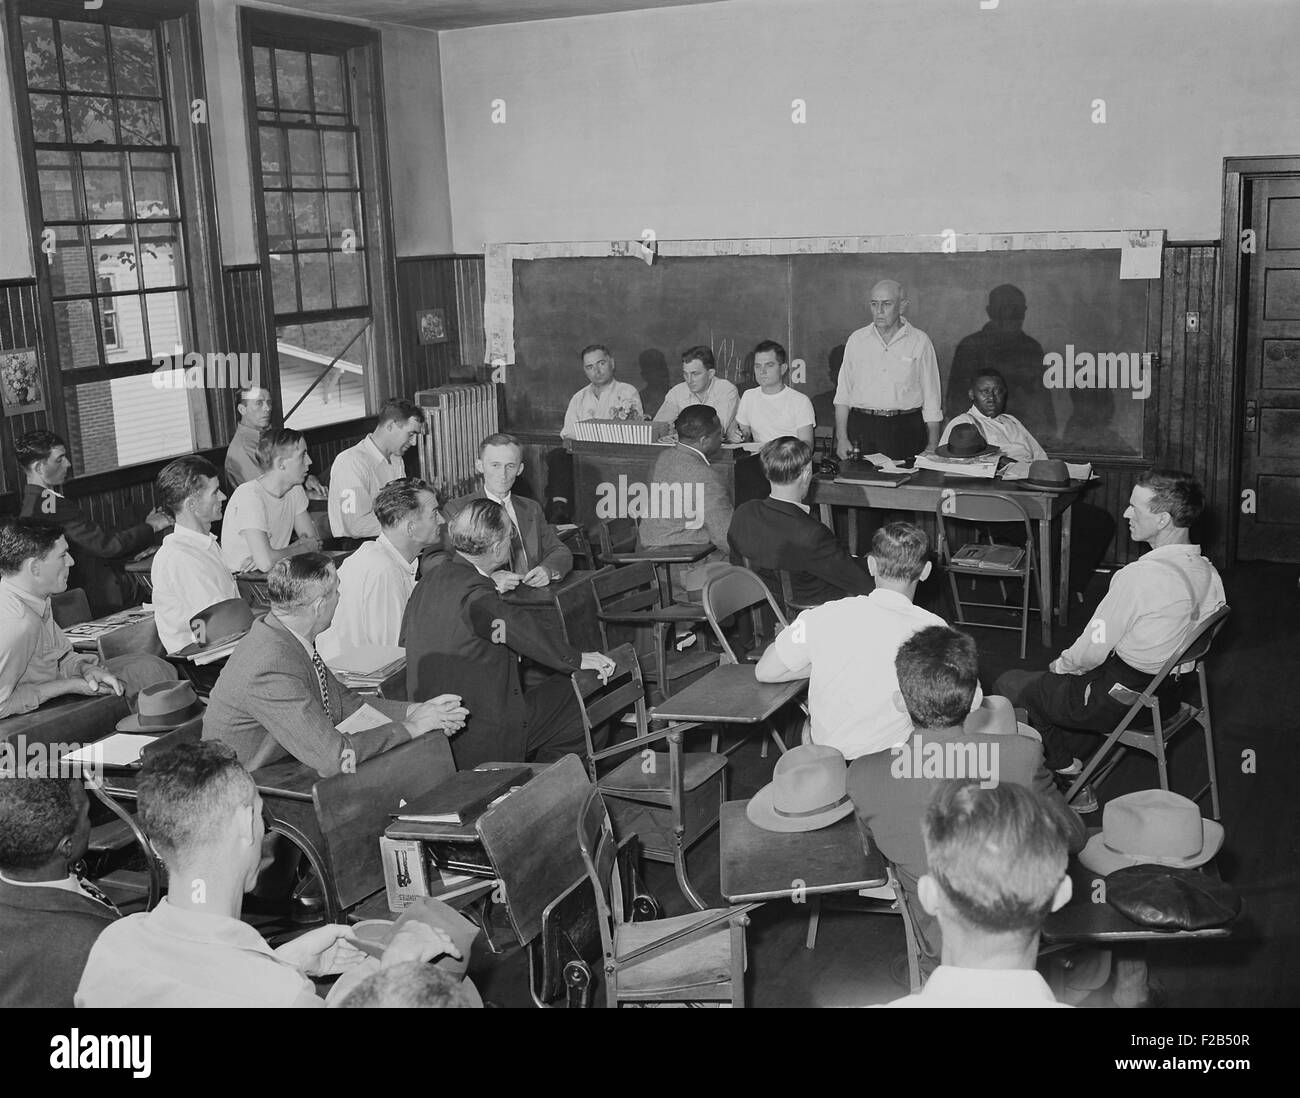 Local United Mine Workers Union meeting on Sunday morning in a schoolhouse. Sept 22, 1946. The men worked at the Inland Steel Company's mines in Wheelwright, Kentucky. One of the Union leaders is an African American. - (BSLOC 2015 1 168) Stock Photo